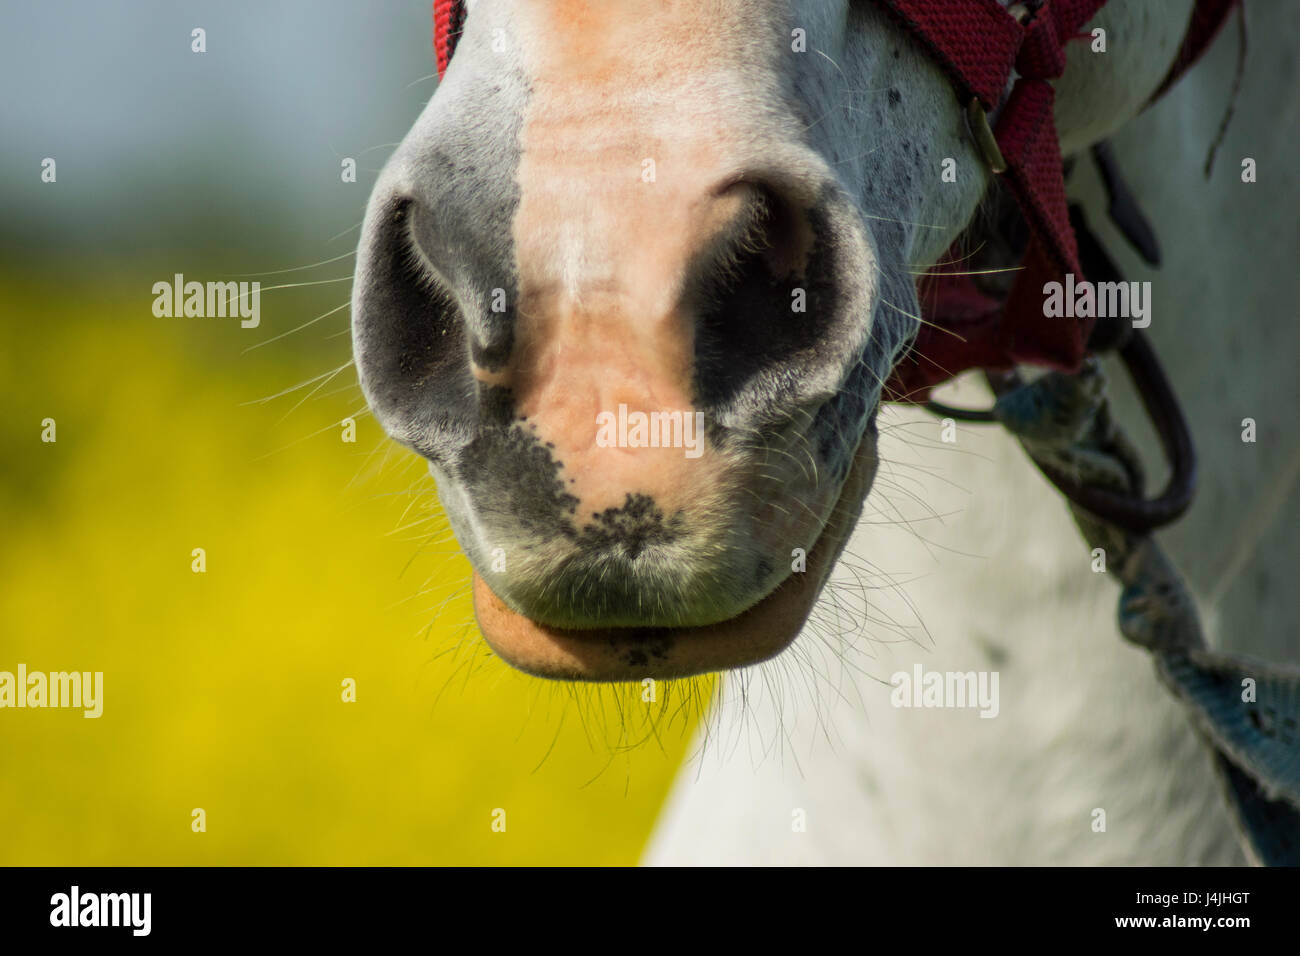 Nose of a white horse Stock Photo